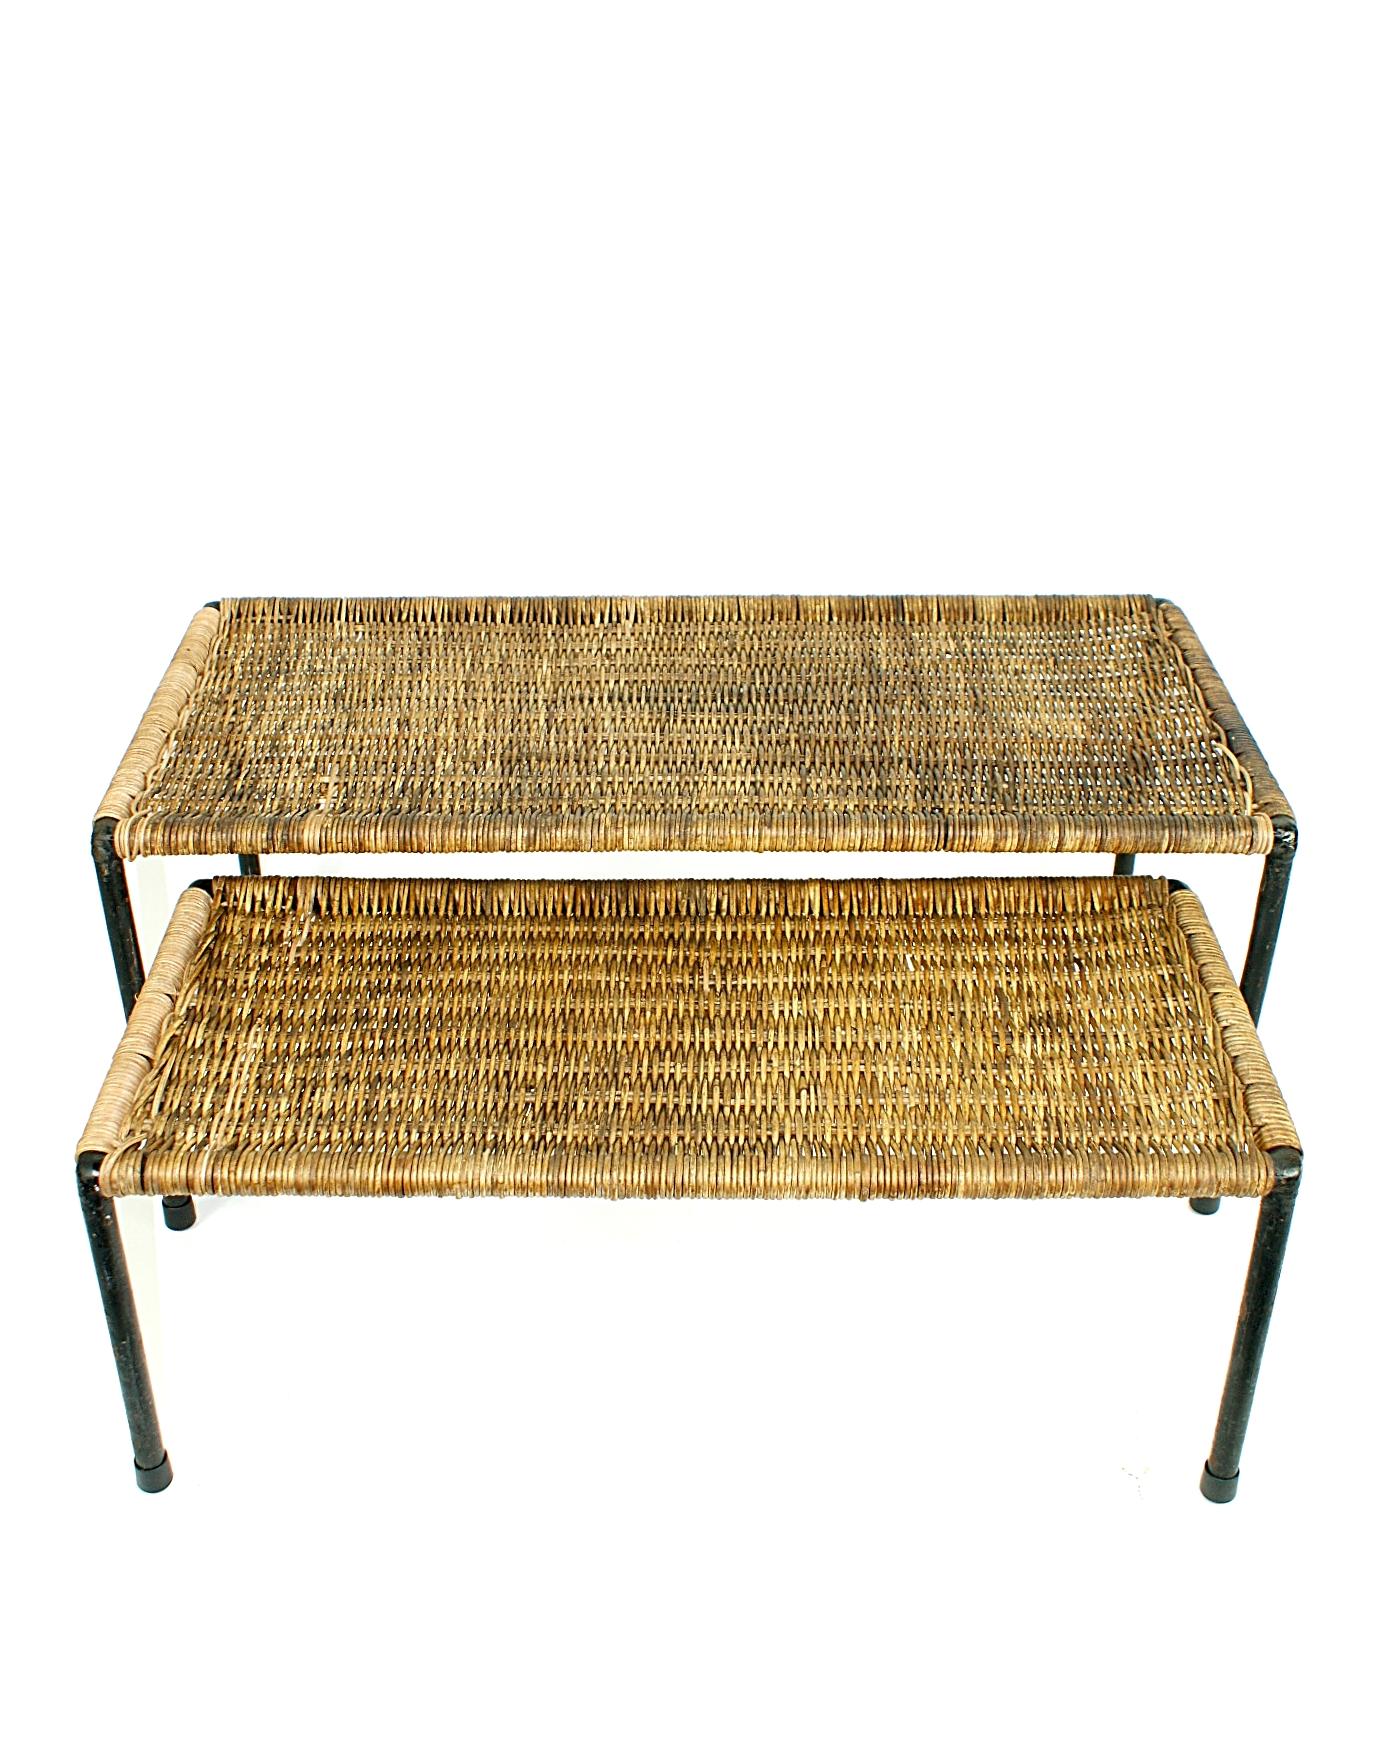 Beautiful and authentic rattan top coffee or side tables, manufactured by Carl Auböck Werkstätte in the 1950s, Vienna. The frames are made of black lacquered steel with woven rattan top. The tables can be used indoor and